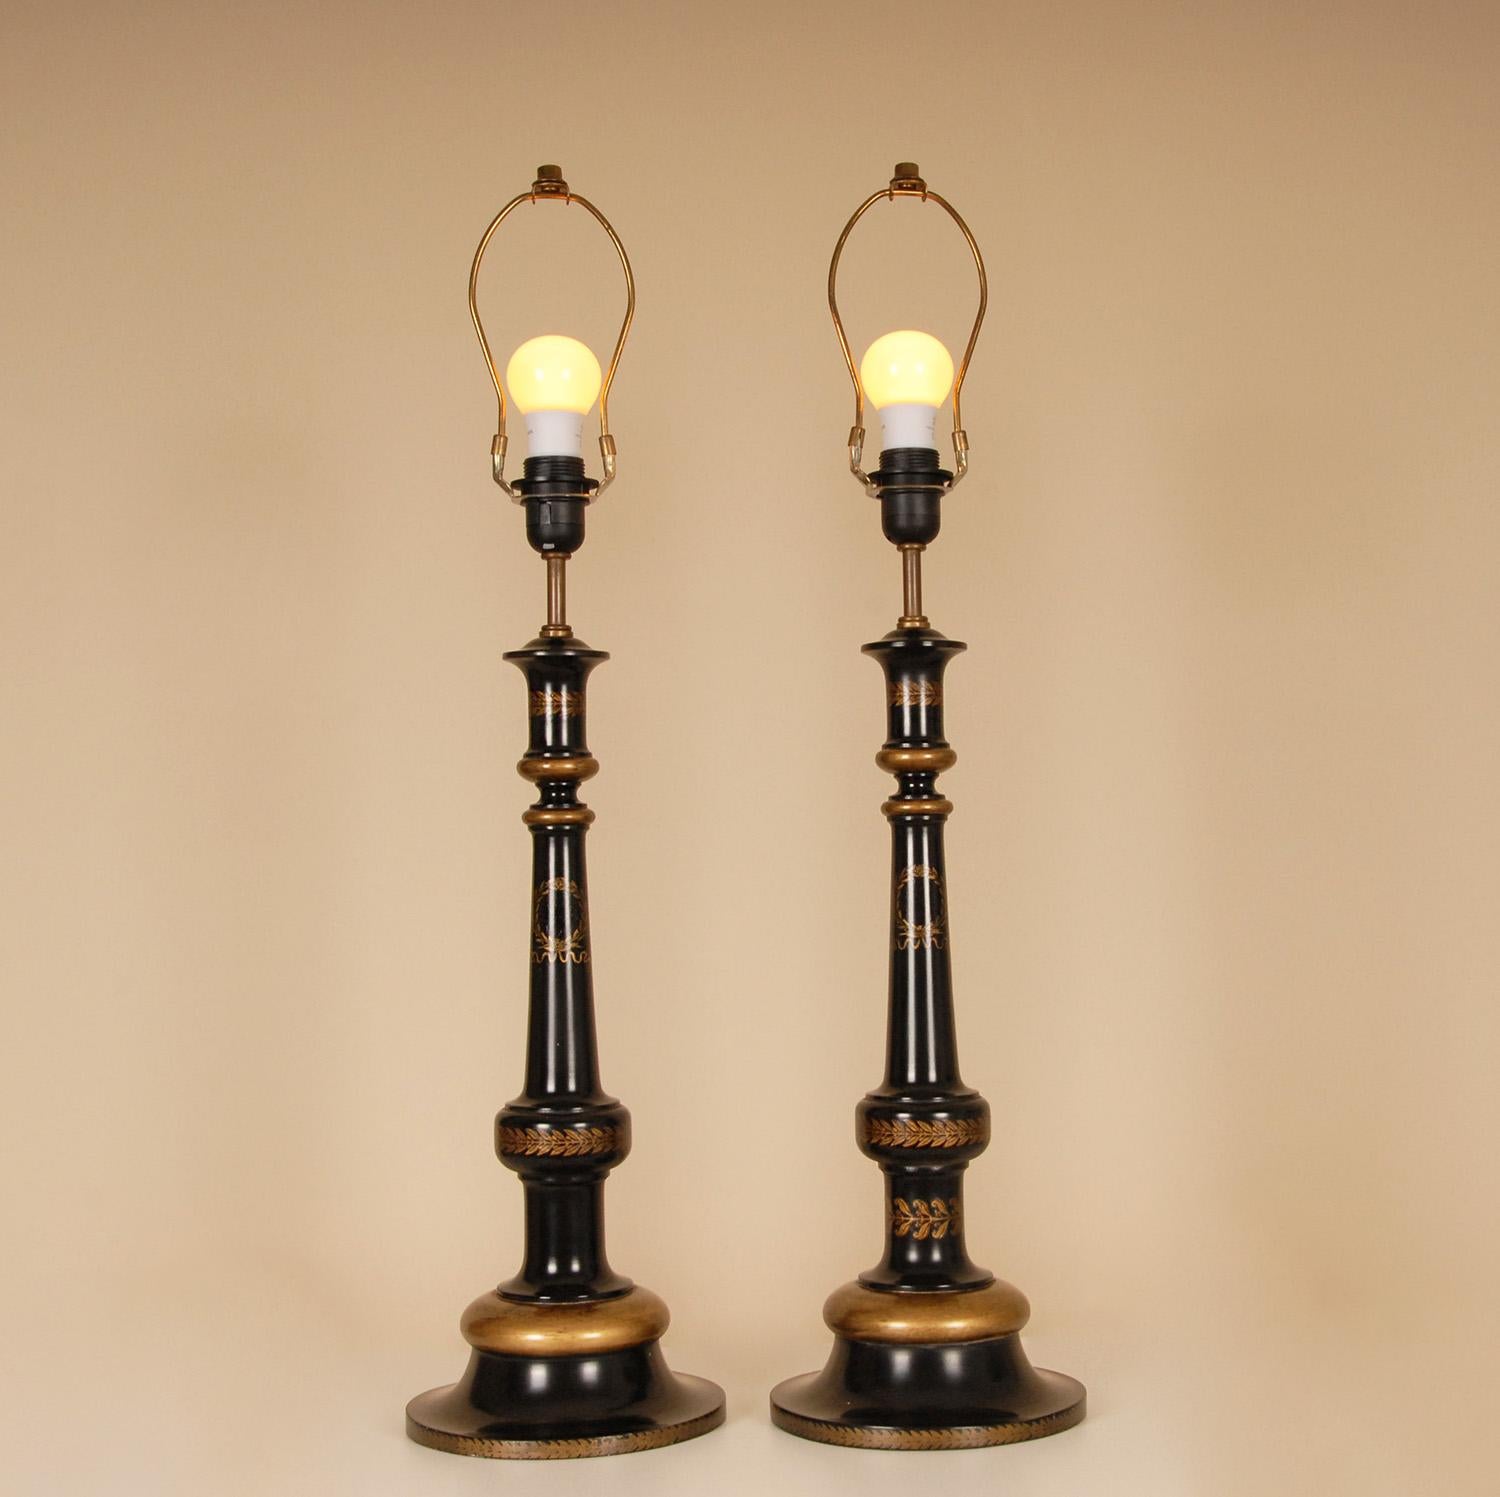 Victorian English Traditional Lamps Gold Black Ebonised wood High End Table Lamps For Sale